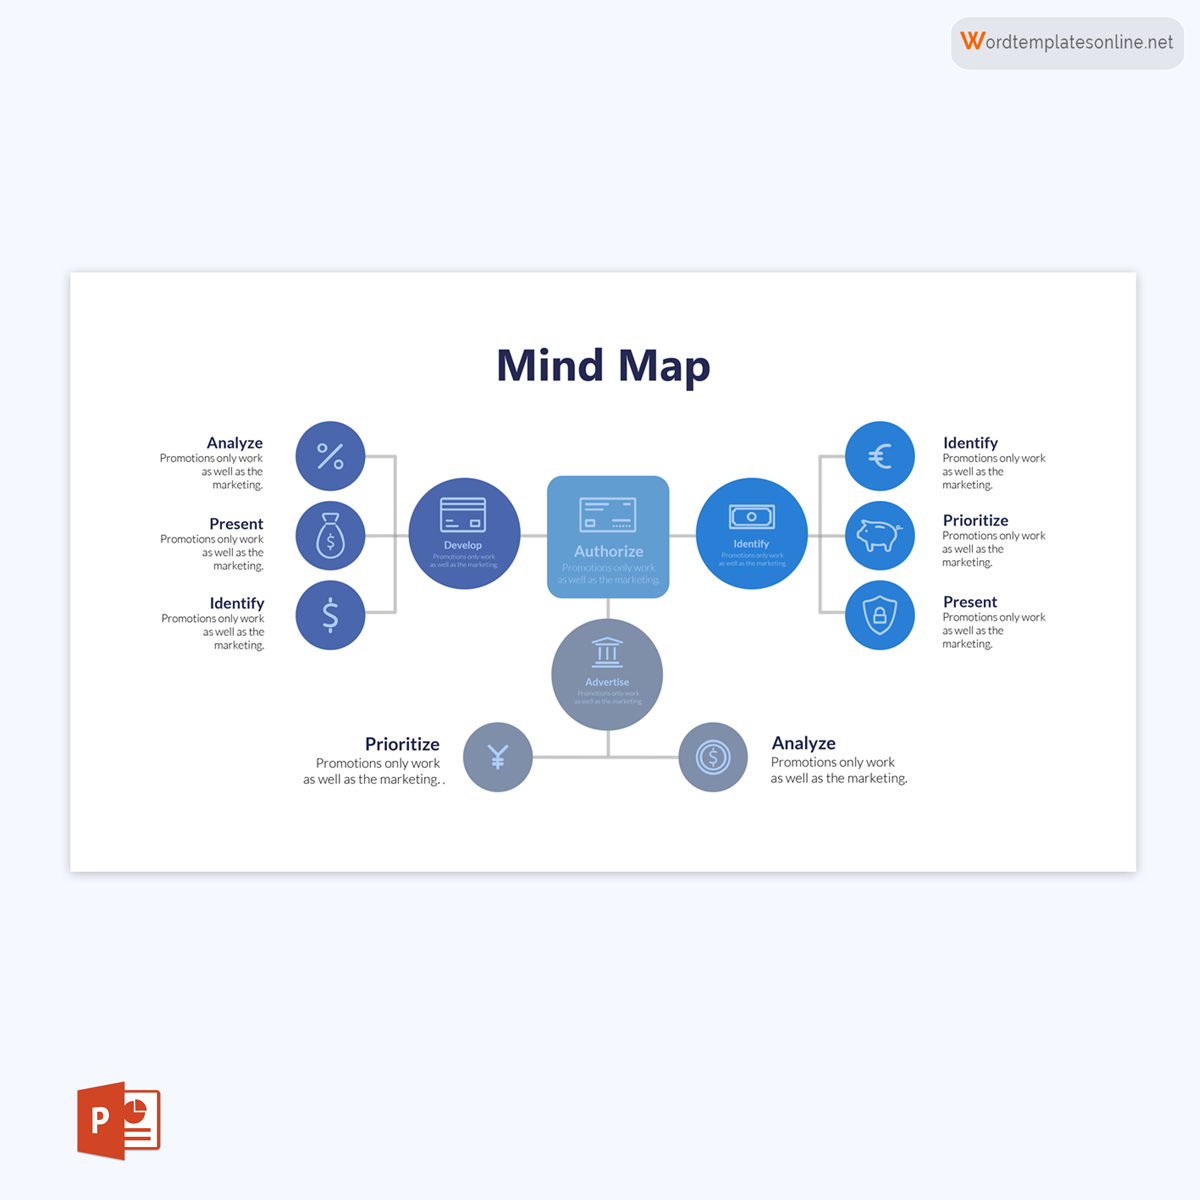 mind map infographic power point